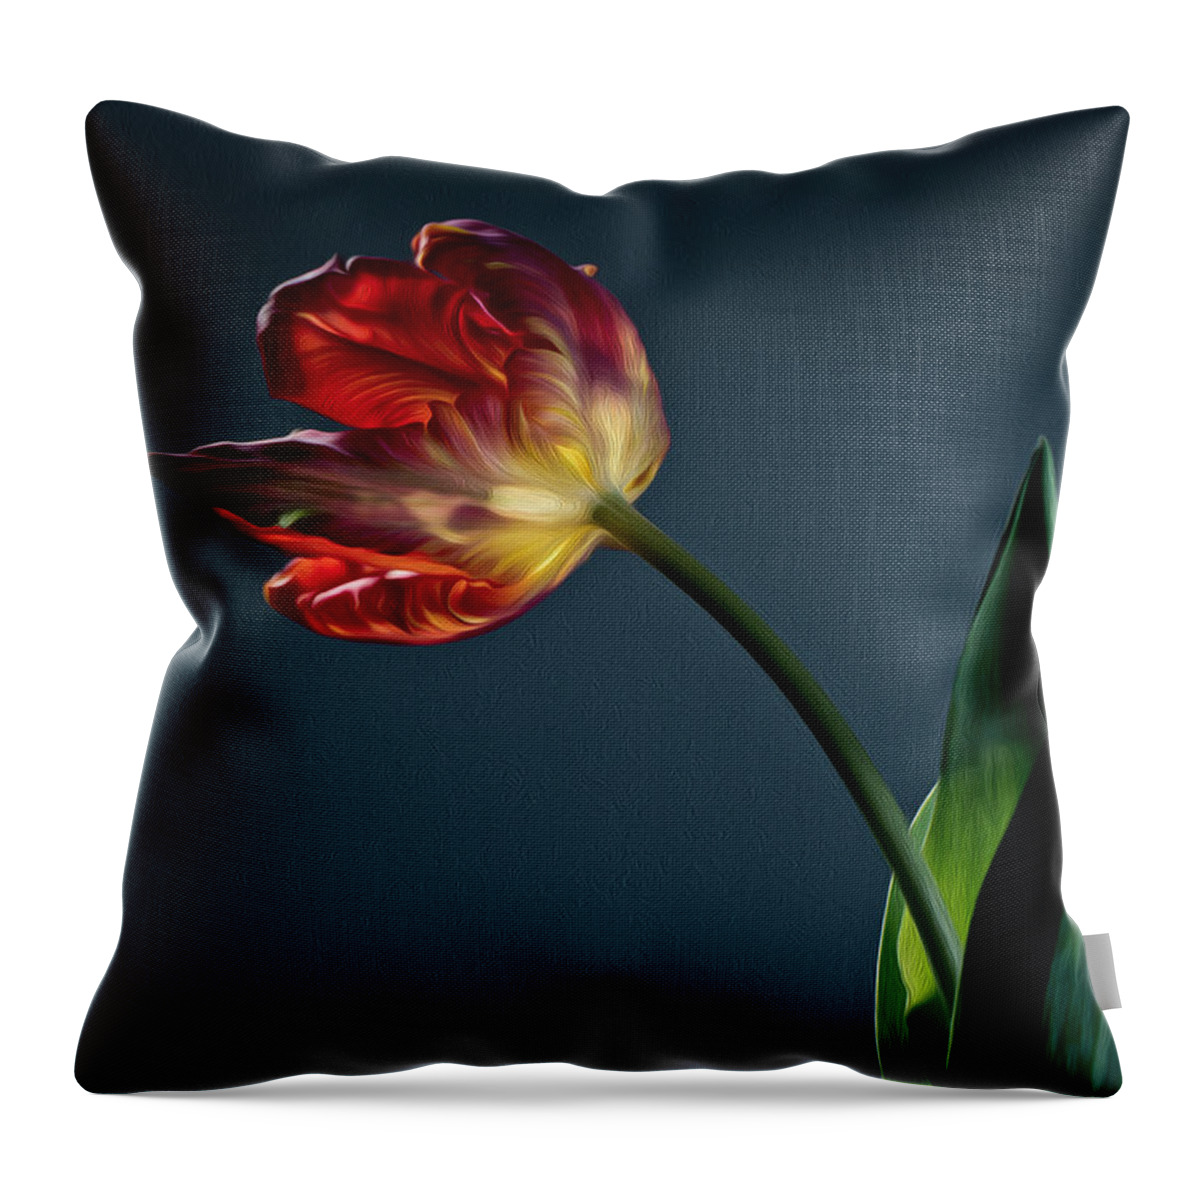 Tulip Throw Pillow featuring the photograph Red Tulip by Nailia Schwarz